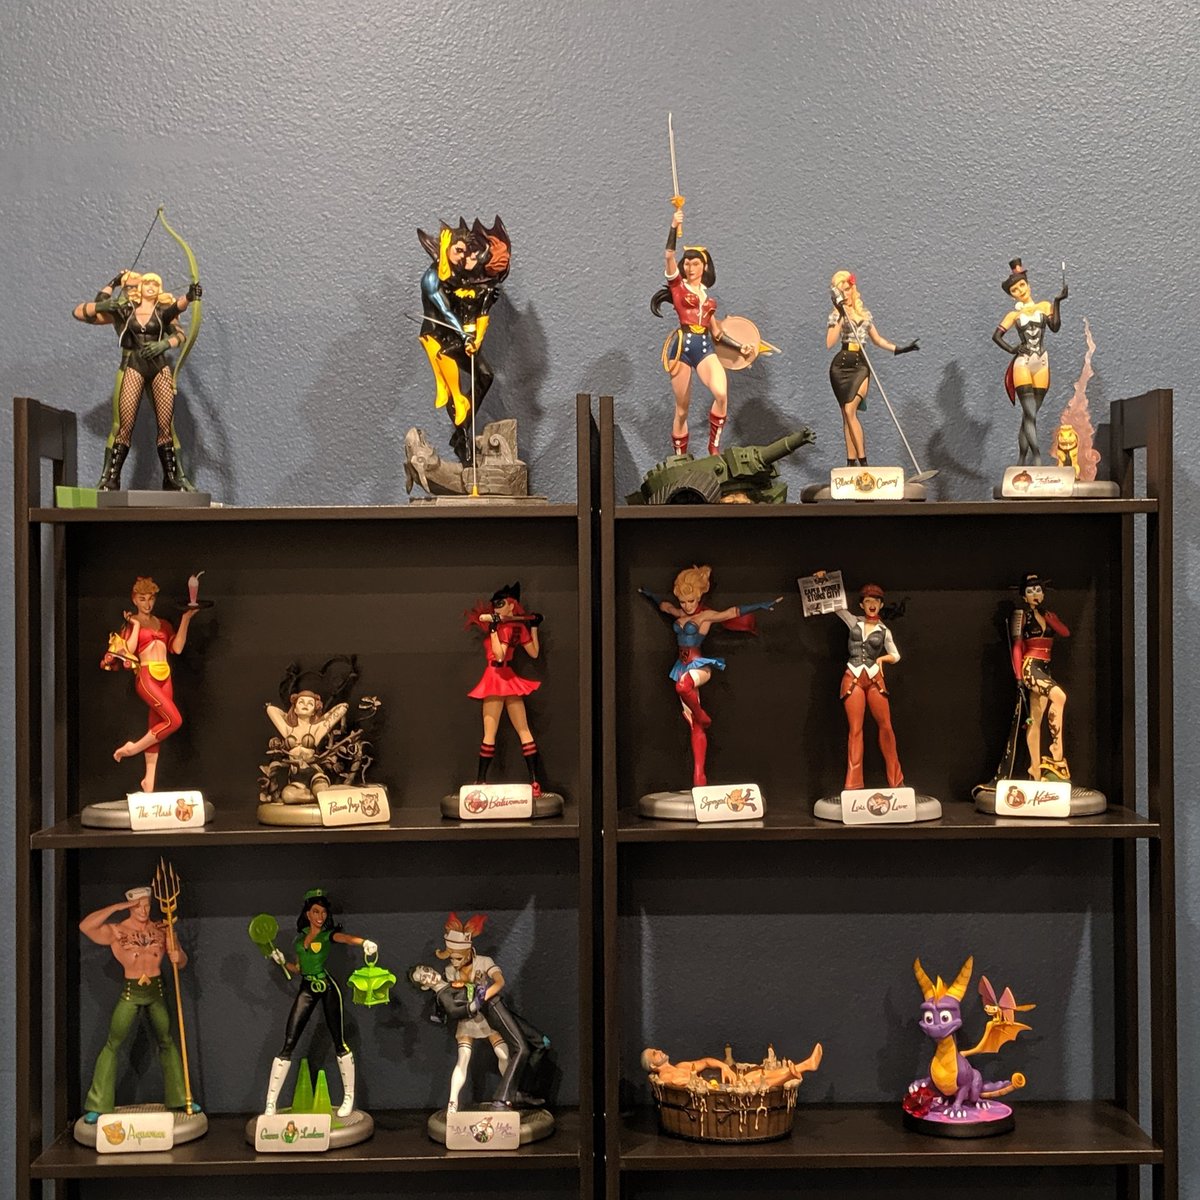 Yay finally got some of my favorite statues up on display in the new house! #dcbombshells #dcdesignerseries #thewitcher3 #first4figuresspyro